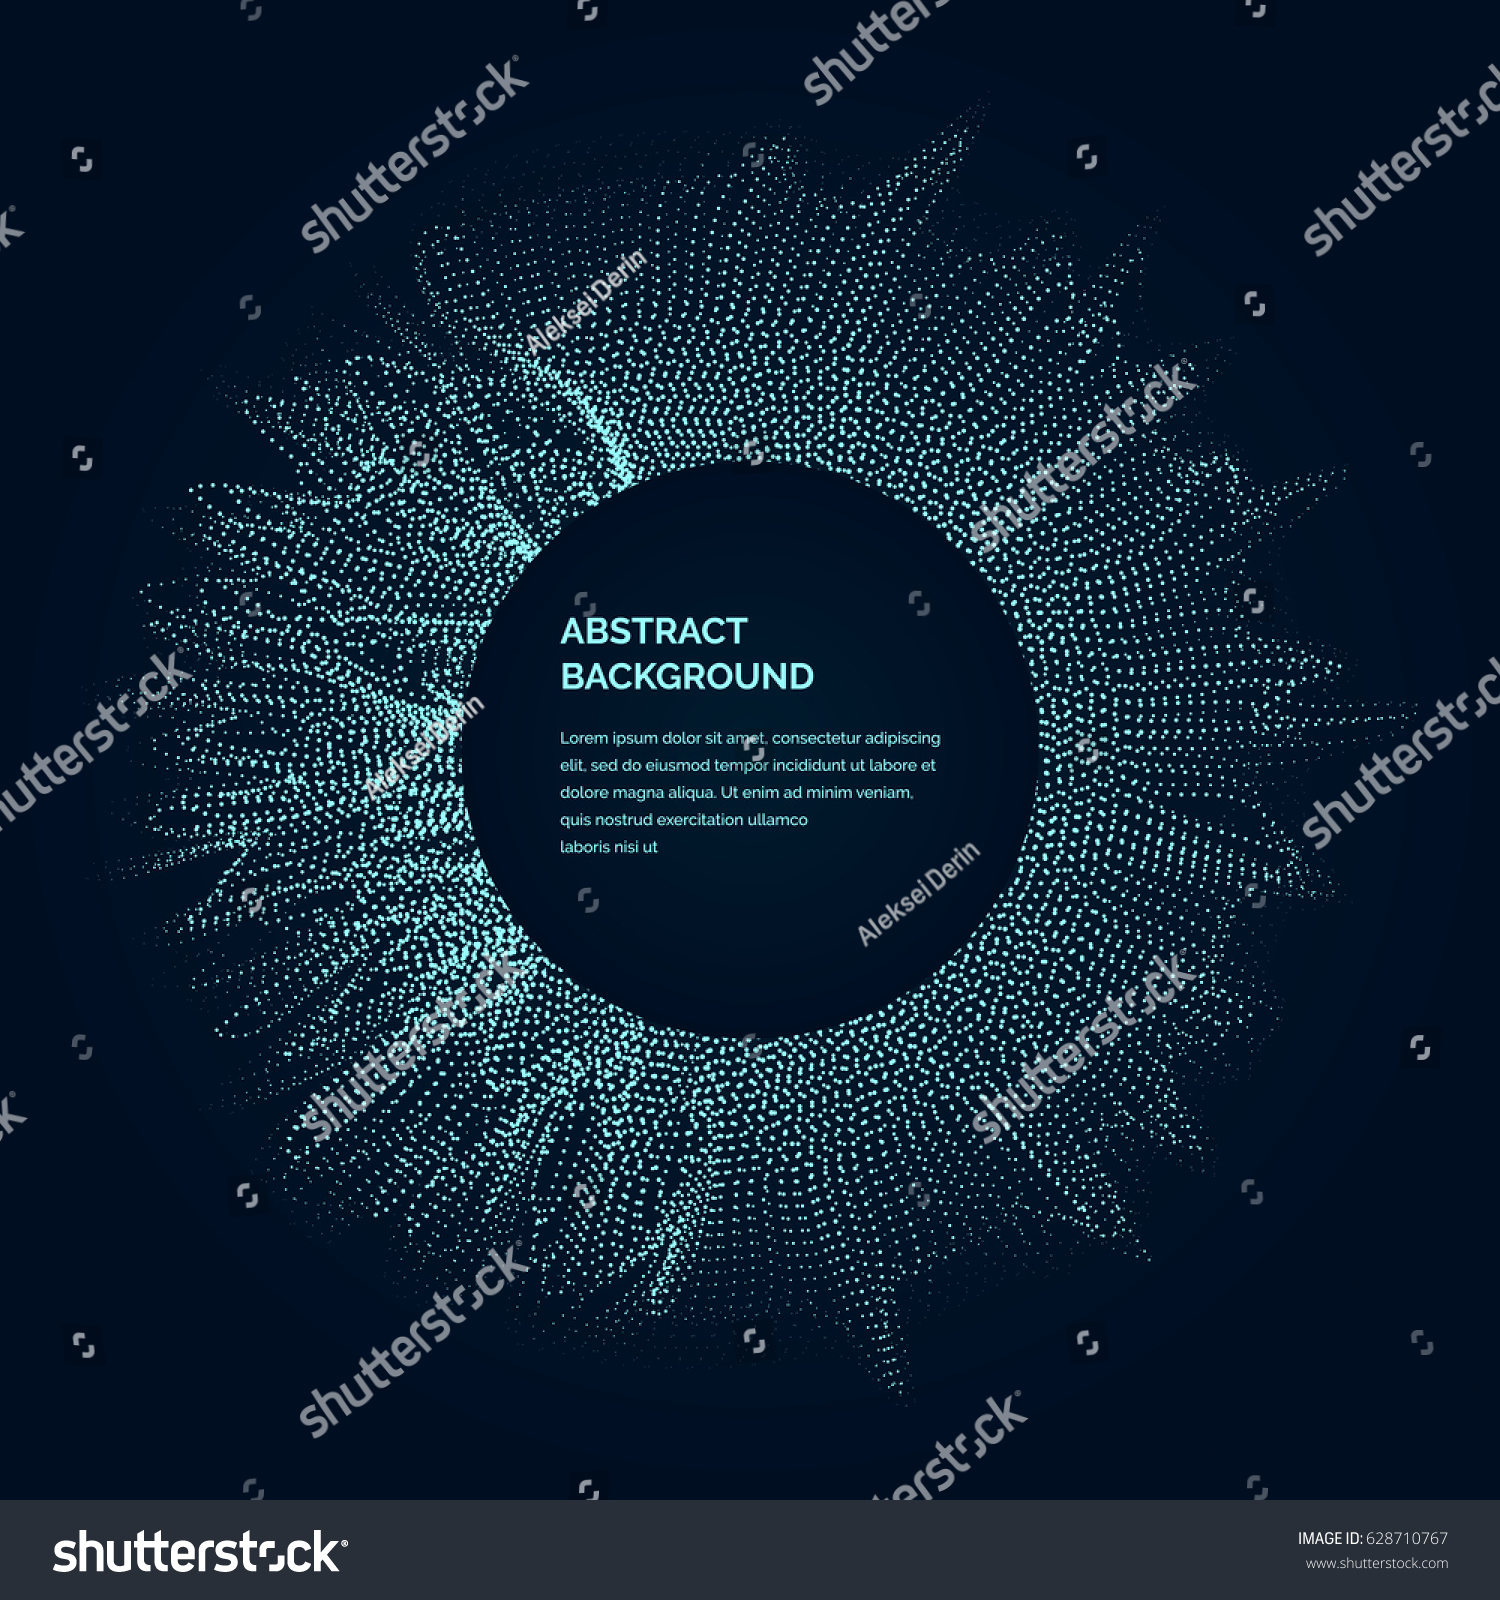 Modern vector illustration with a deformed circle shape of the particles of blue color on a dark background. Good as a template for your design #628710767